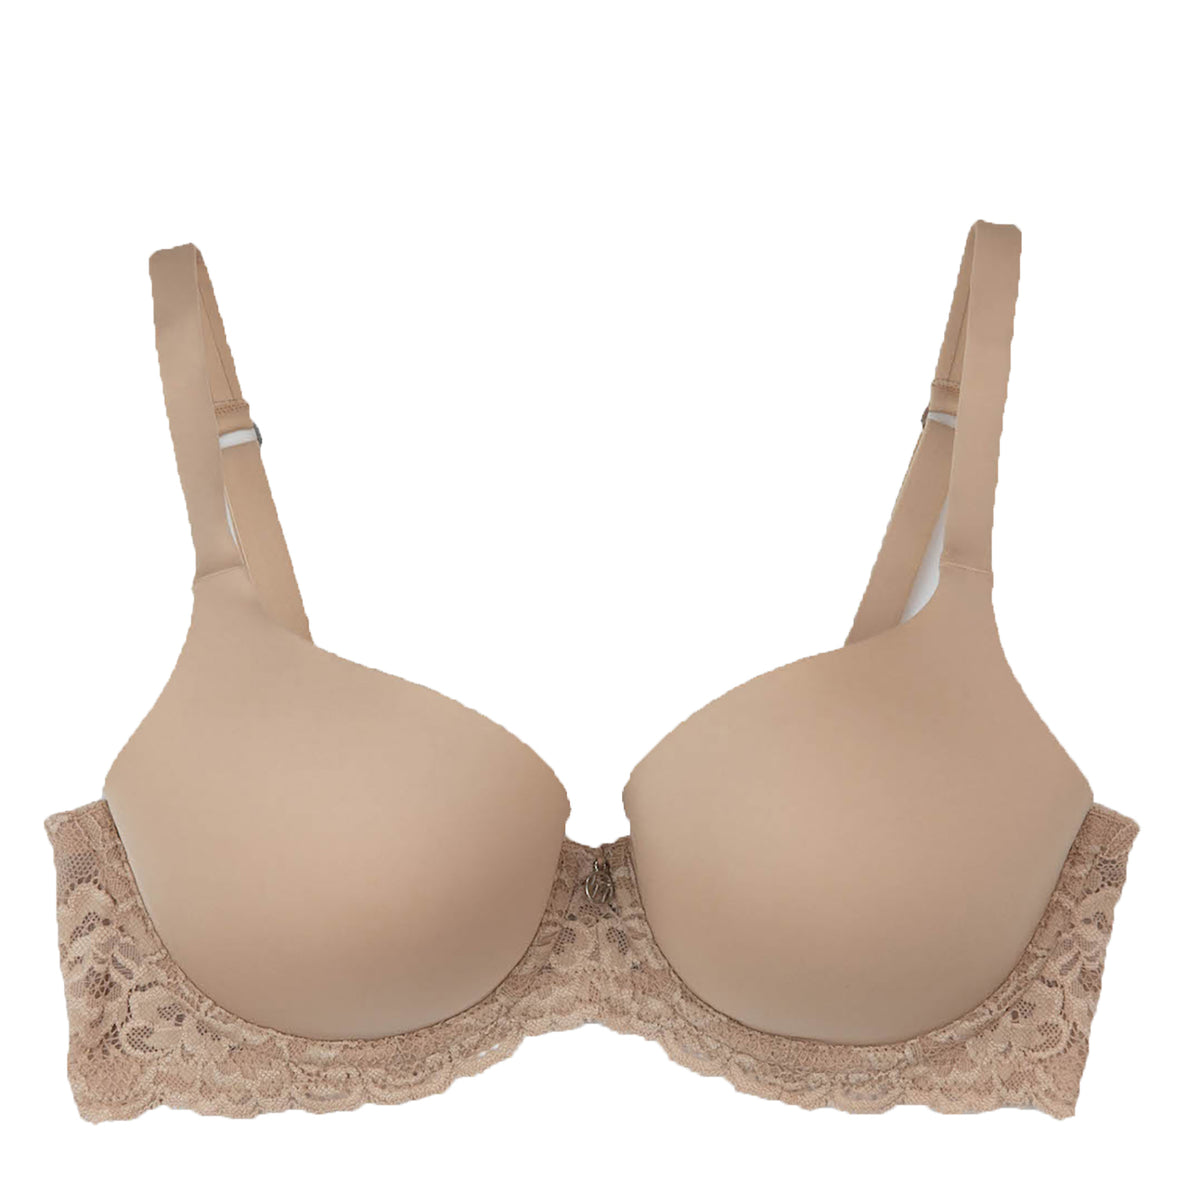 Montelle Women's Prodigy Ultimate Push Up Bra, Nude, 36C at